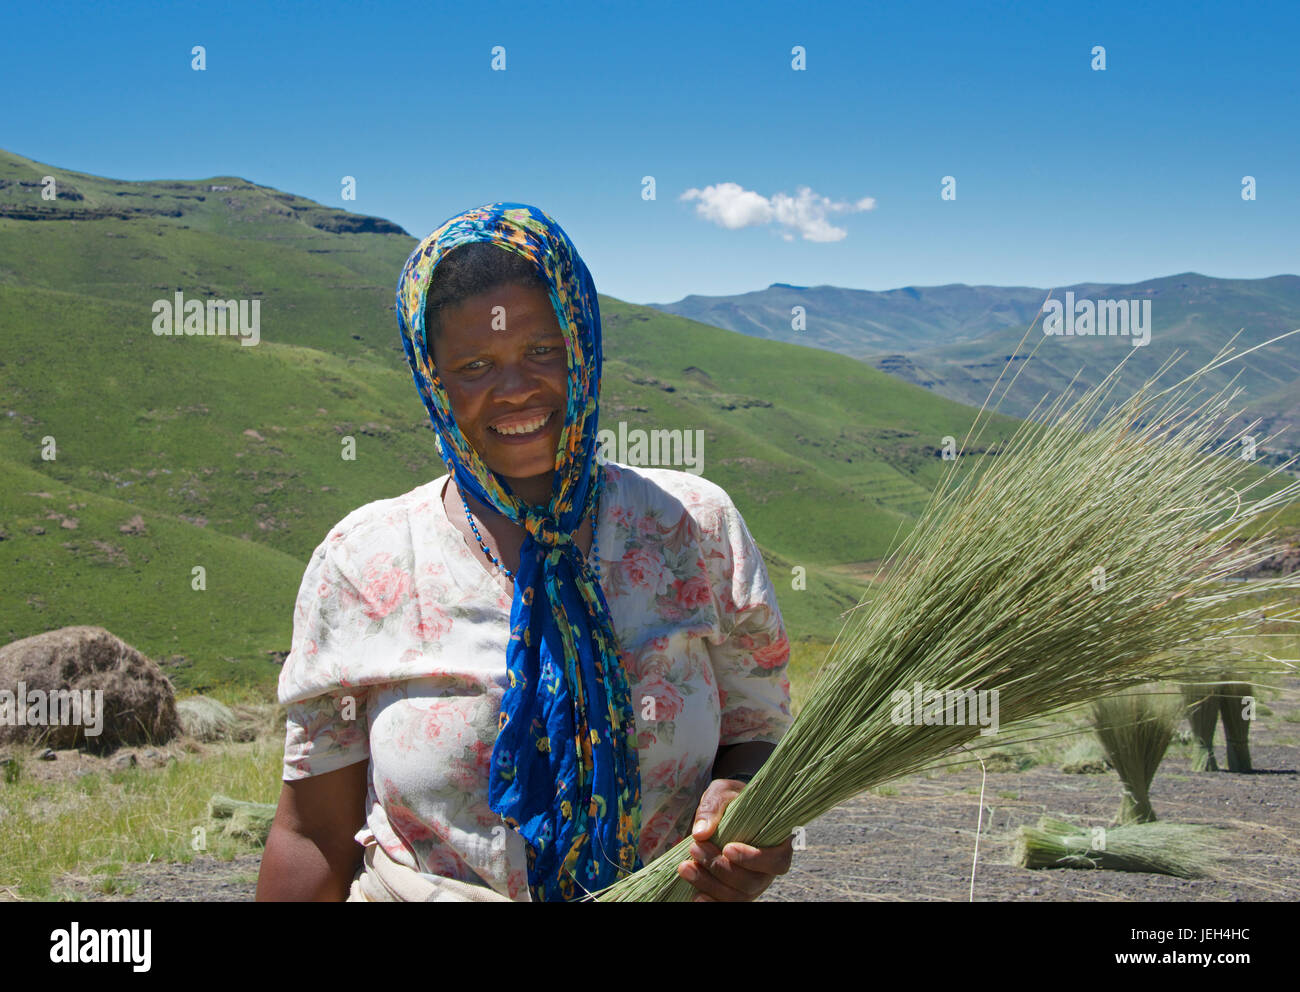 Smiling woman holding sun dried crops Maloti Mountains Leribe District Lesotho Southern Africa Stock Photo